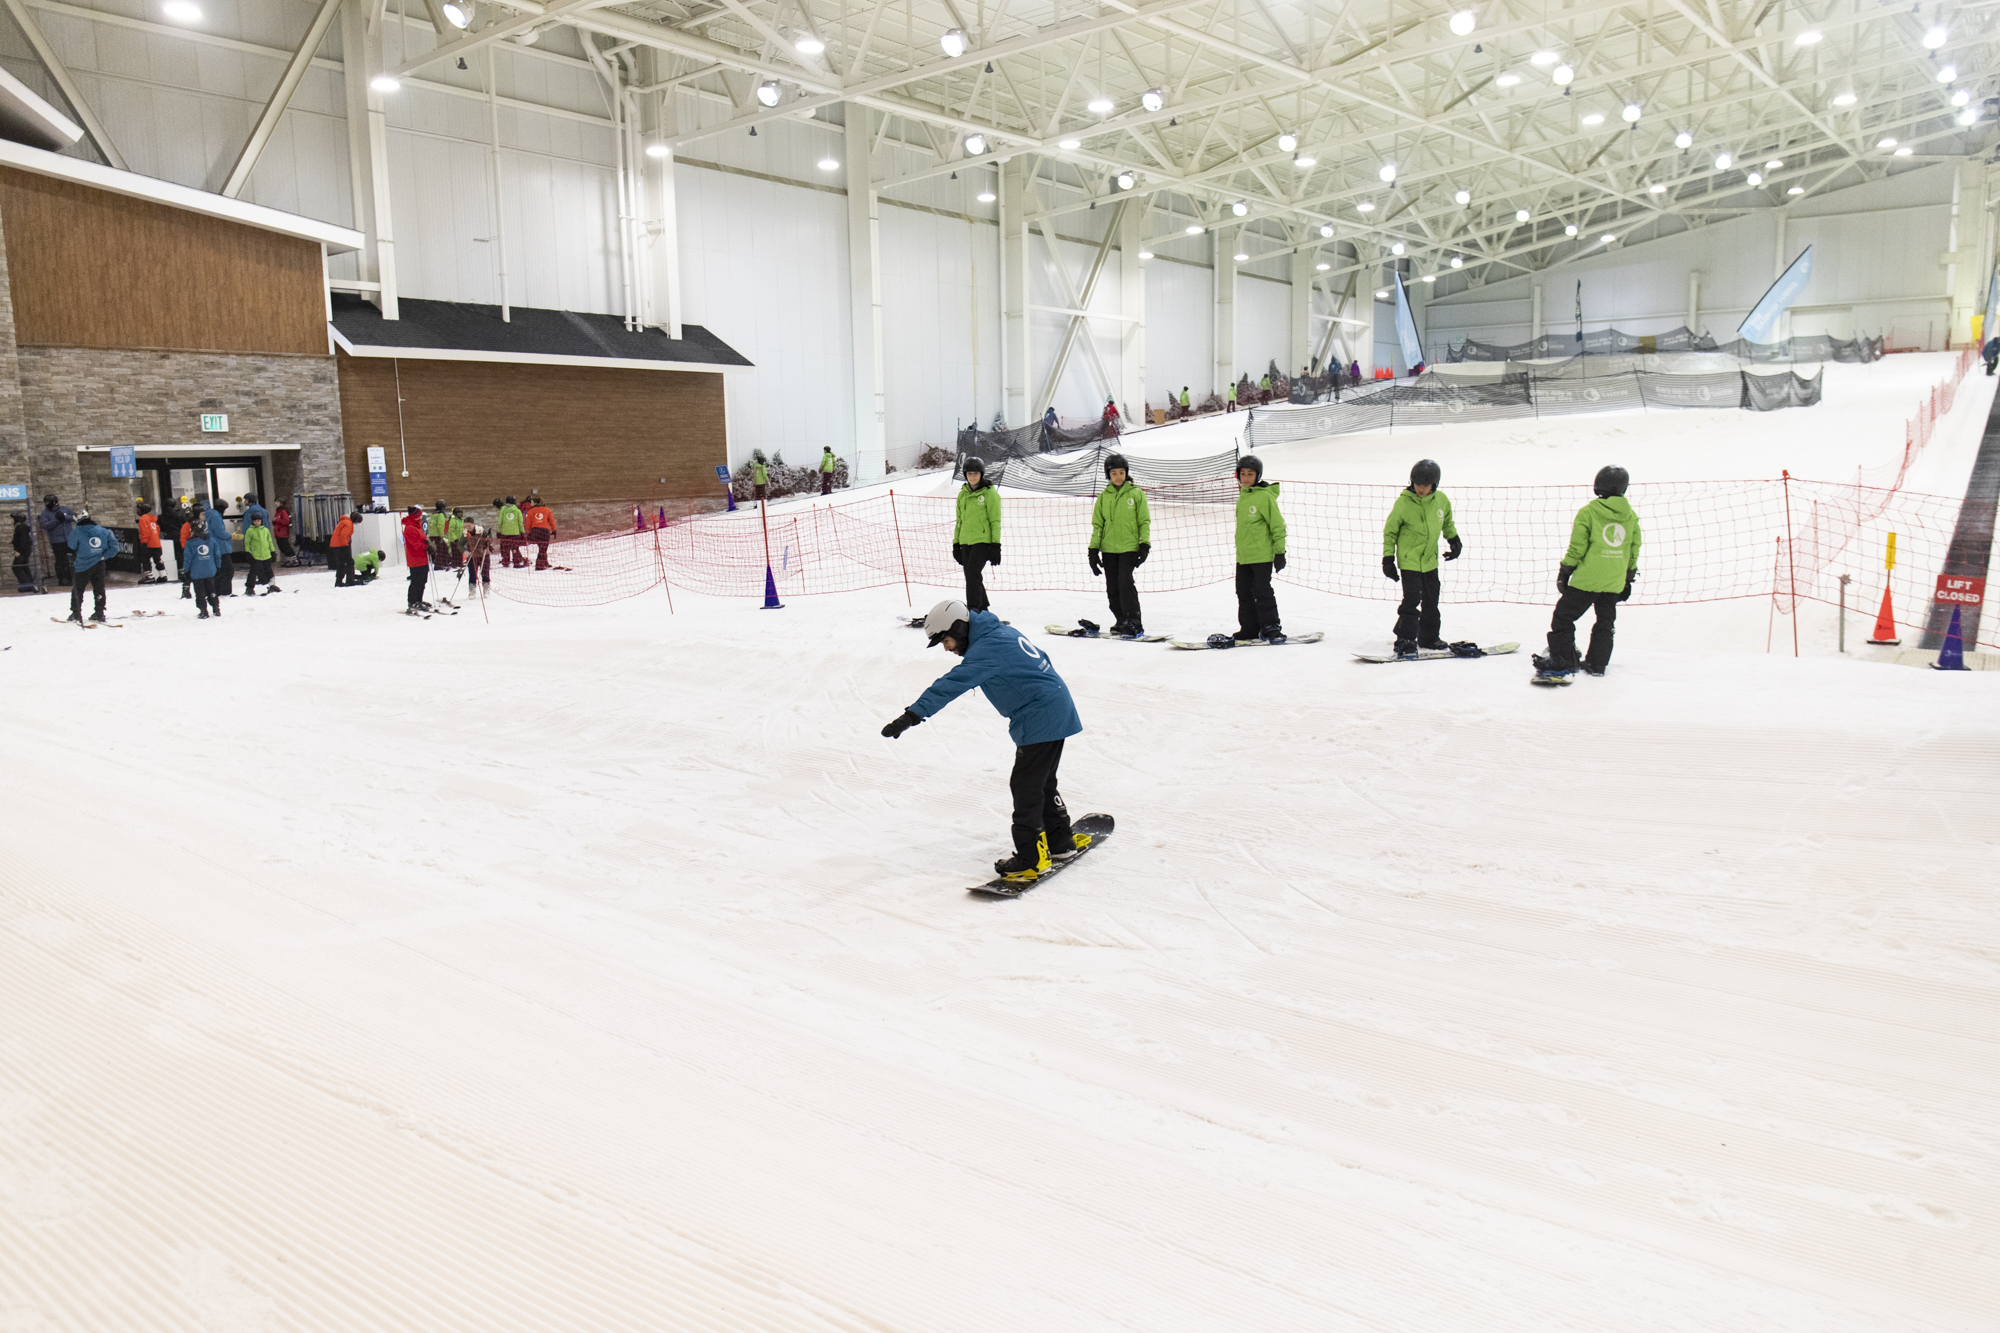 Big Snow American Dream on indoor slope in New Jersey awaits re